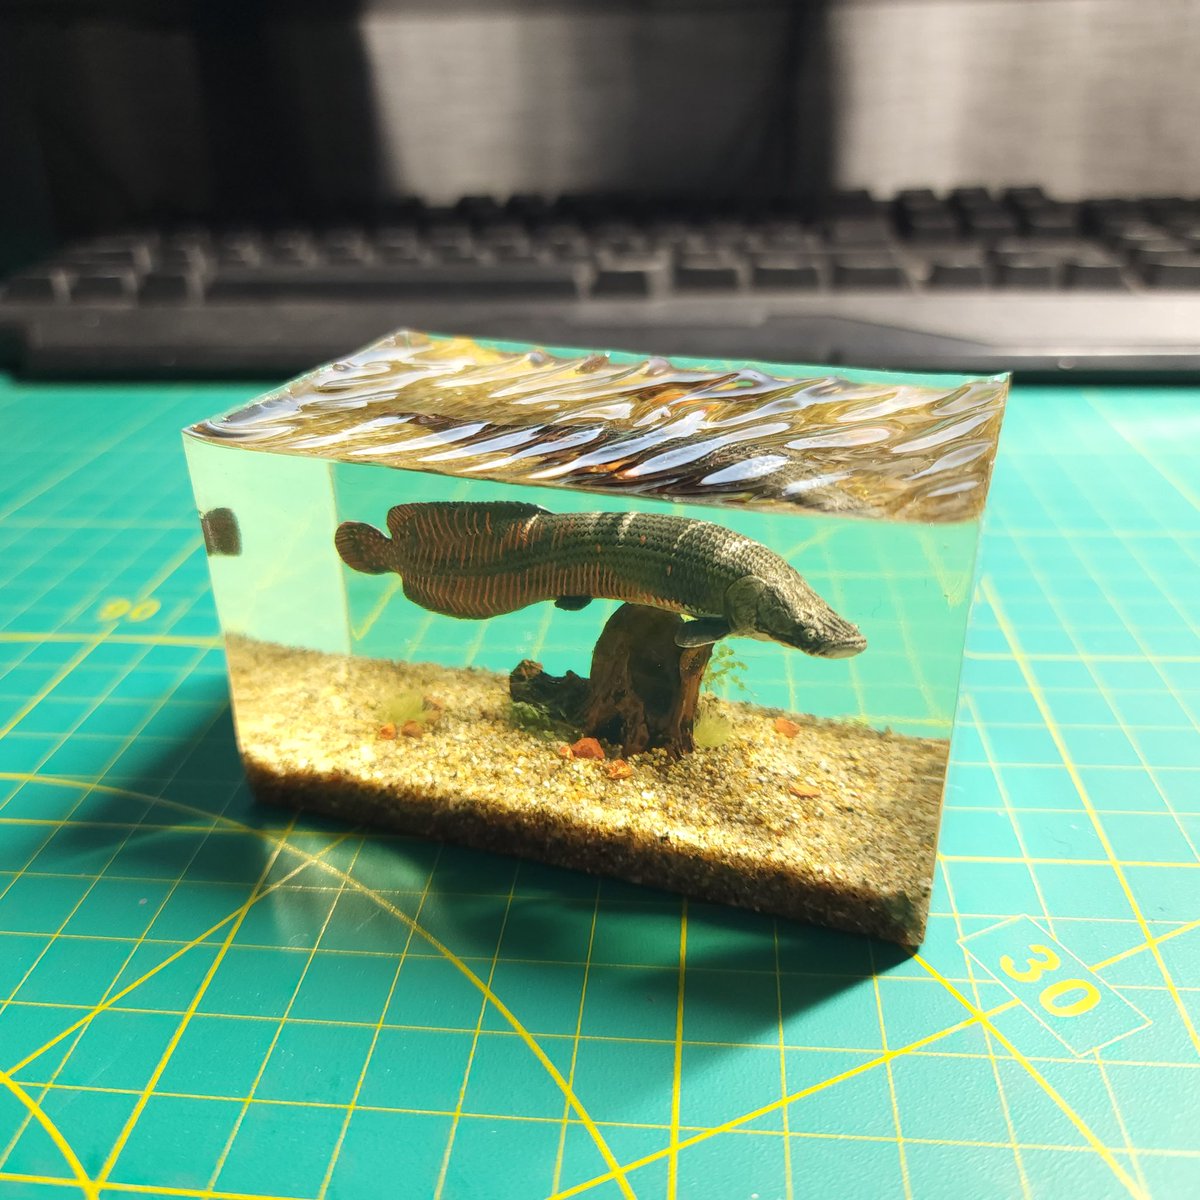 Give-away! Arapaima gigas (pirarucu) mini resin diorama! 1️⃣ like & RT 2️⃣ follow 3️⃣ comment an aquatic creature you would like to see me do in the future Will pick someone at random July 1, GL! More pics in comments